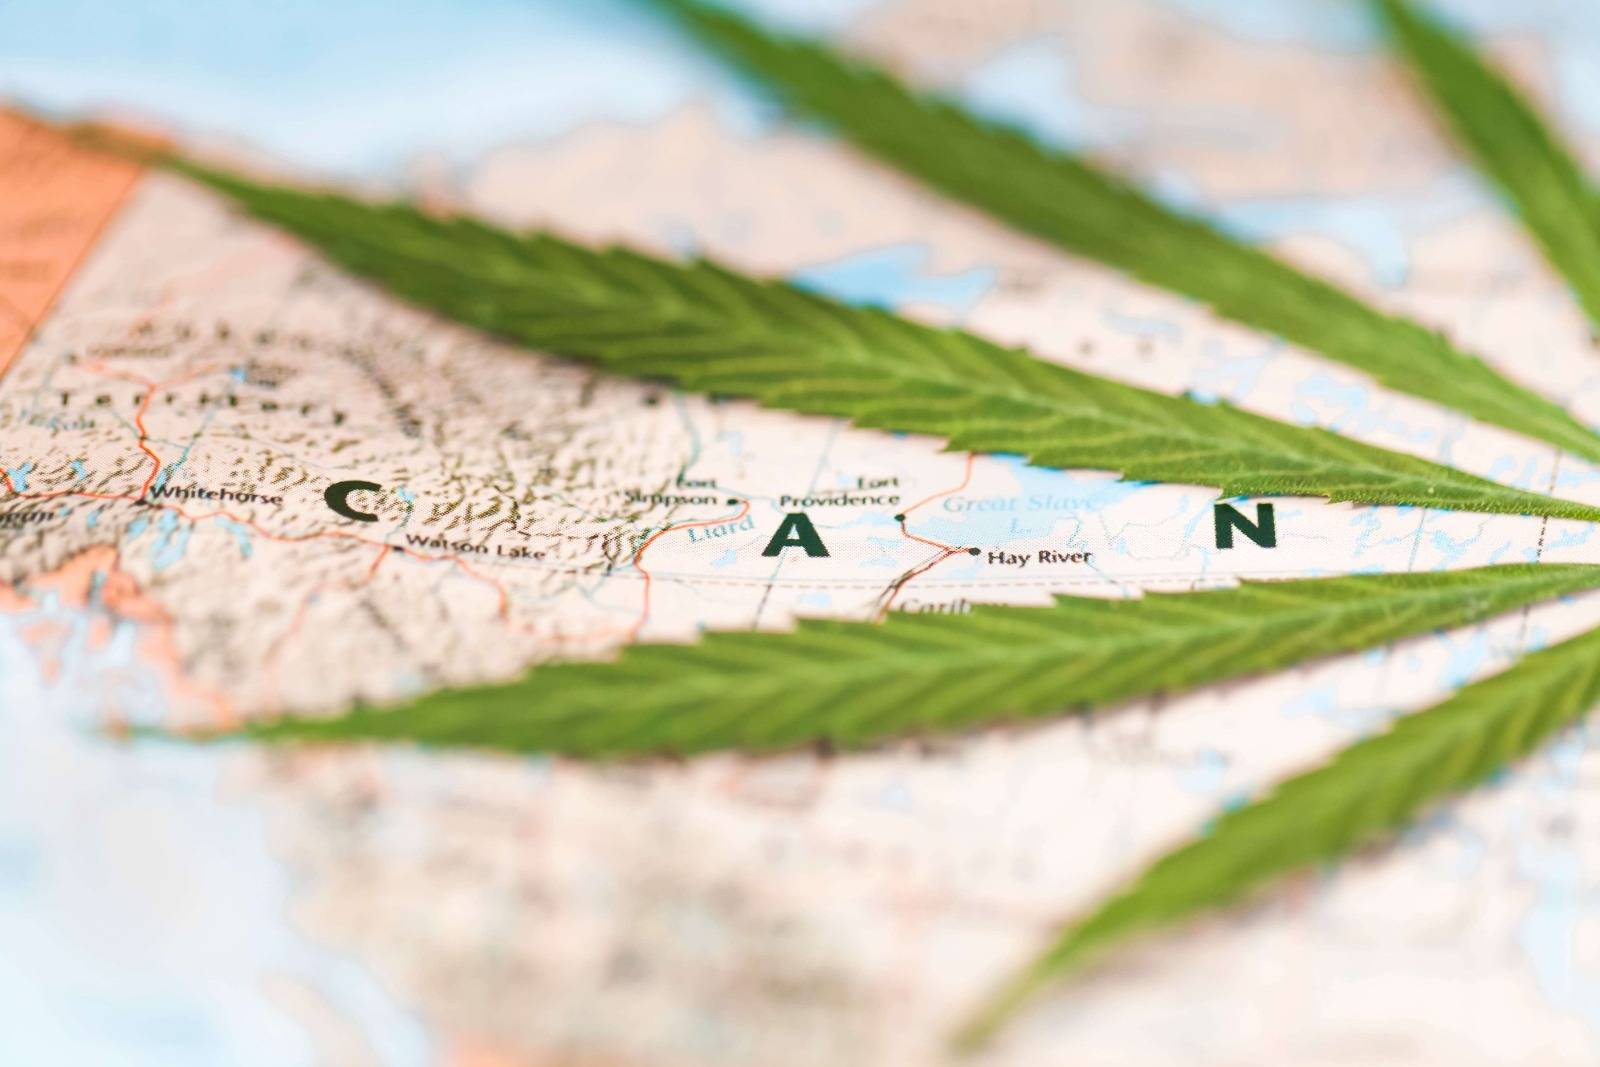 Cannabis leaf on the map of Canada, a 420 friendly country. SpeedGreens